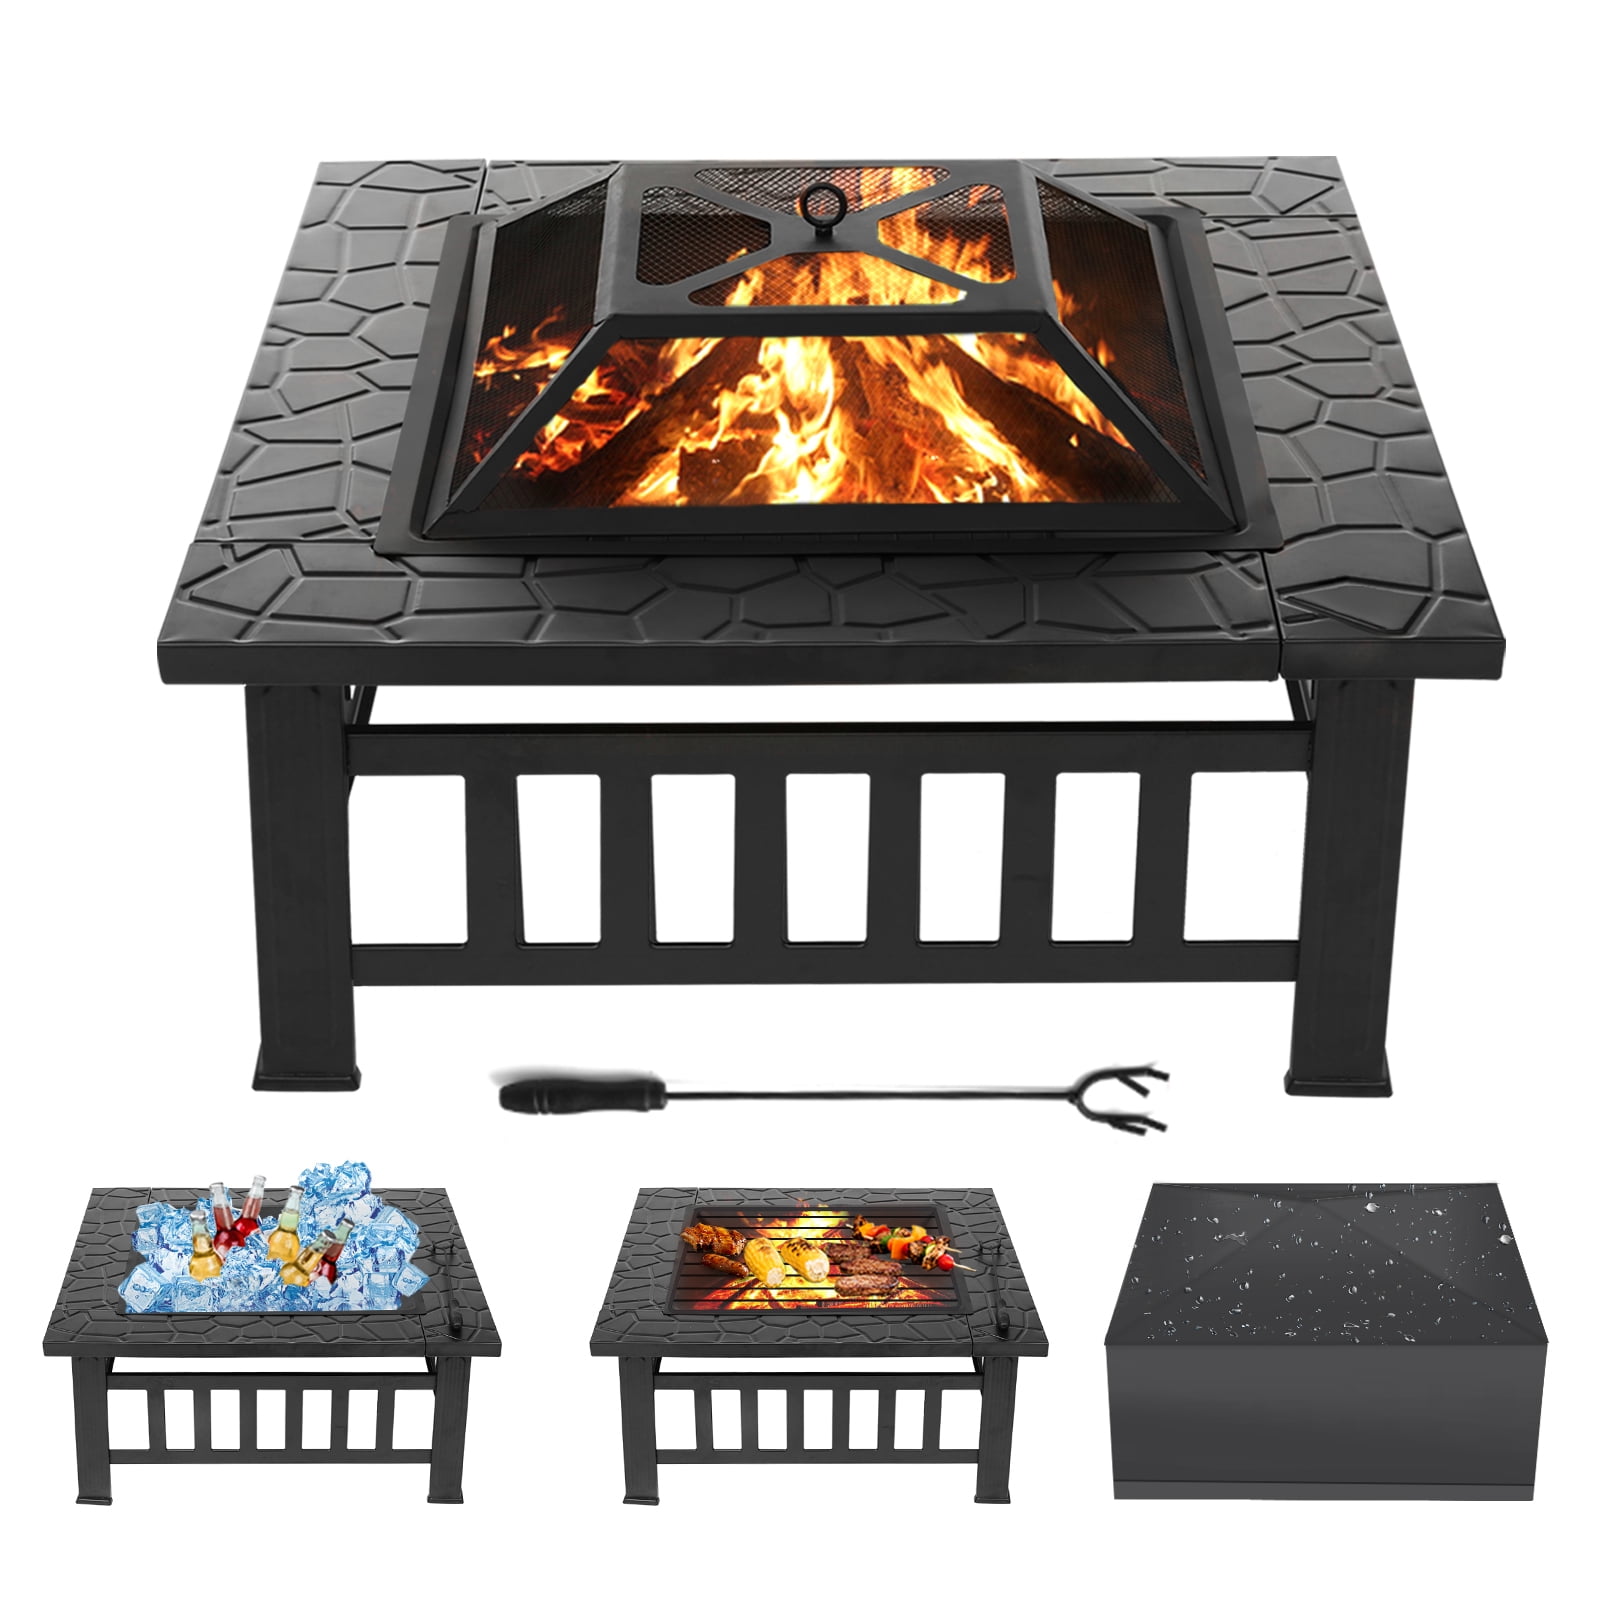 Square Garden Fire Pit With Tiles Large Log Burner Ice Bucket Outdoor Heater 